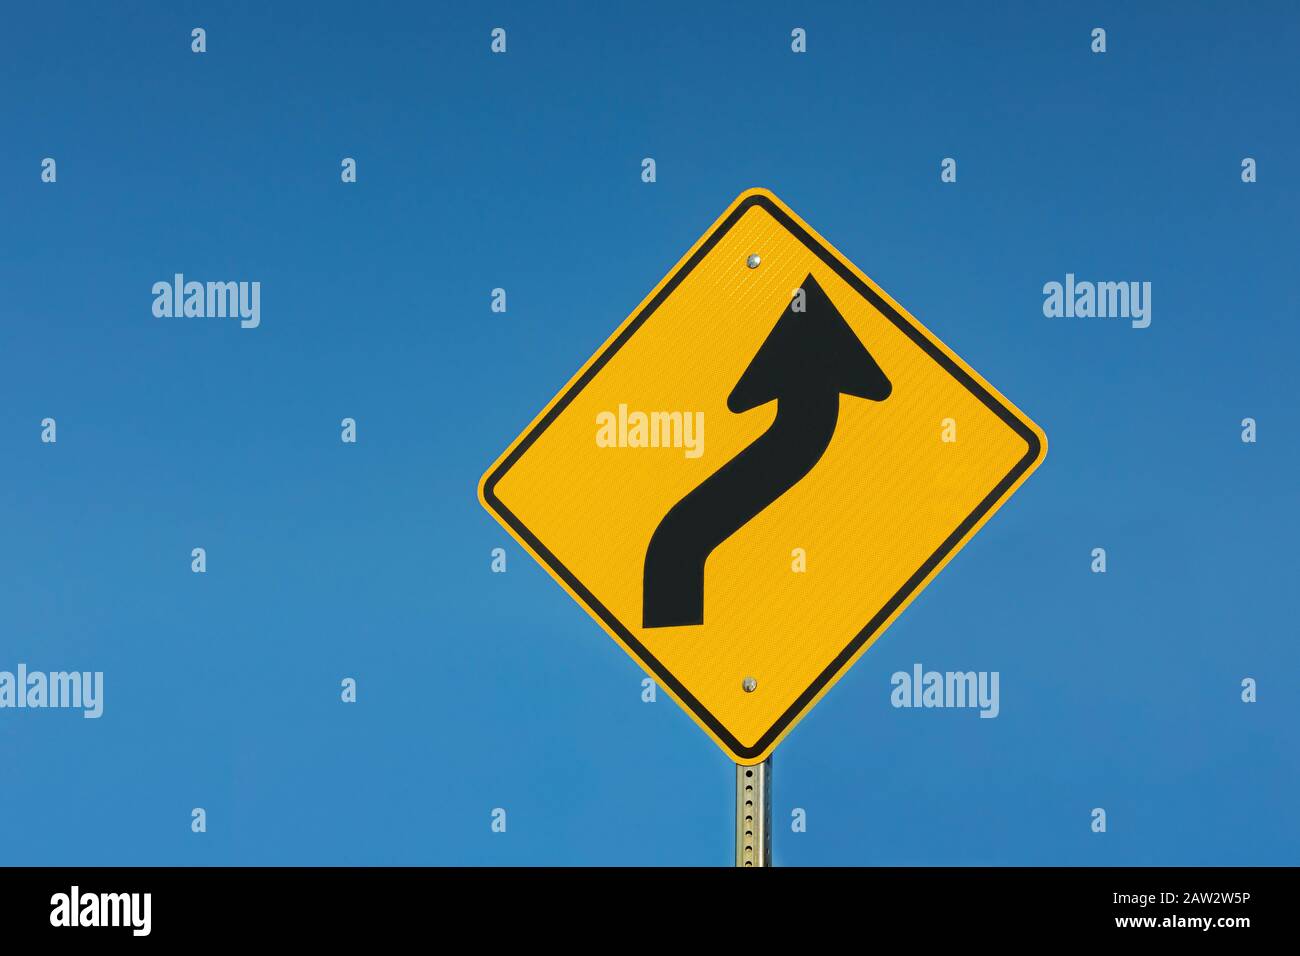 Yellow reflective winding road ahead traffic sign isolated on sunny blue sky background Stock Photo